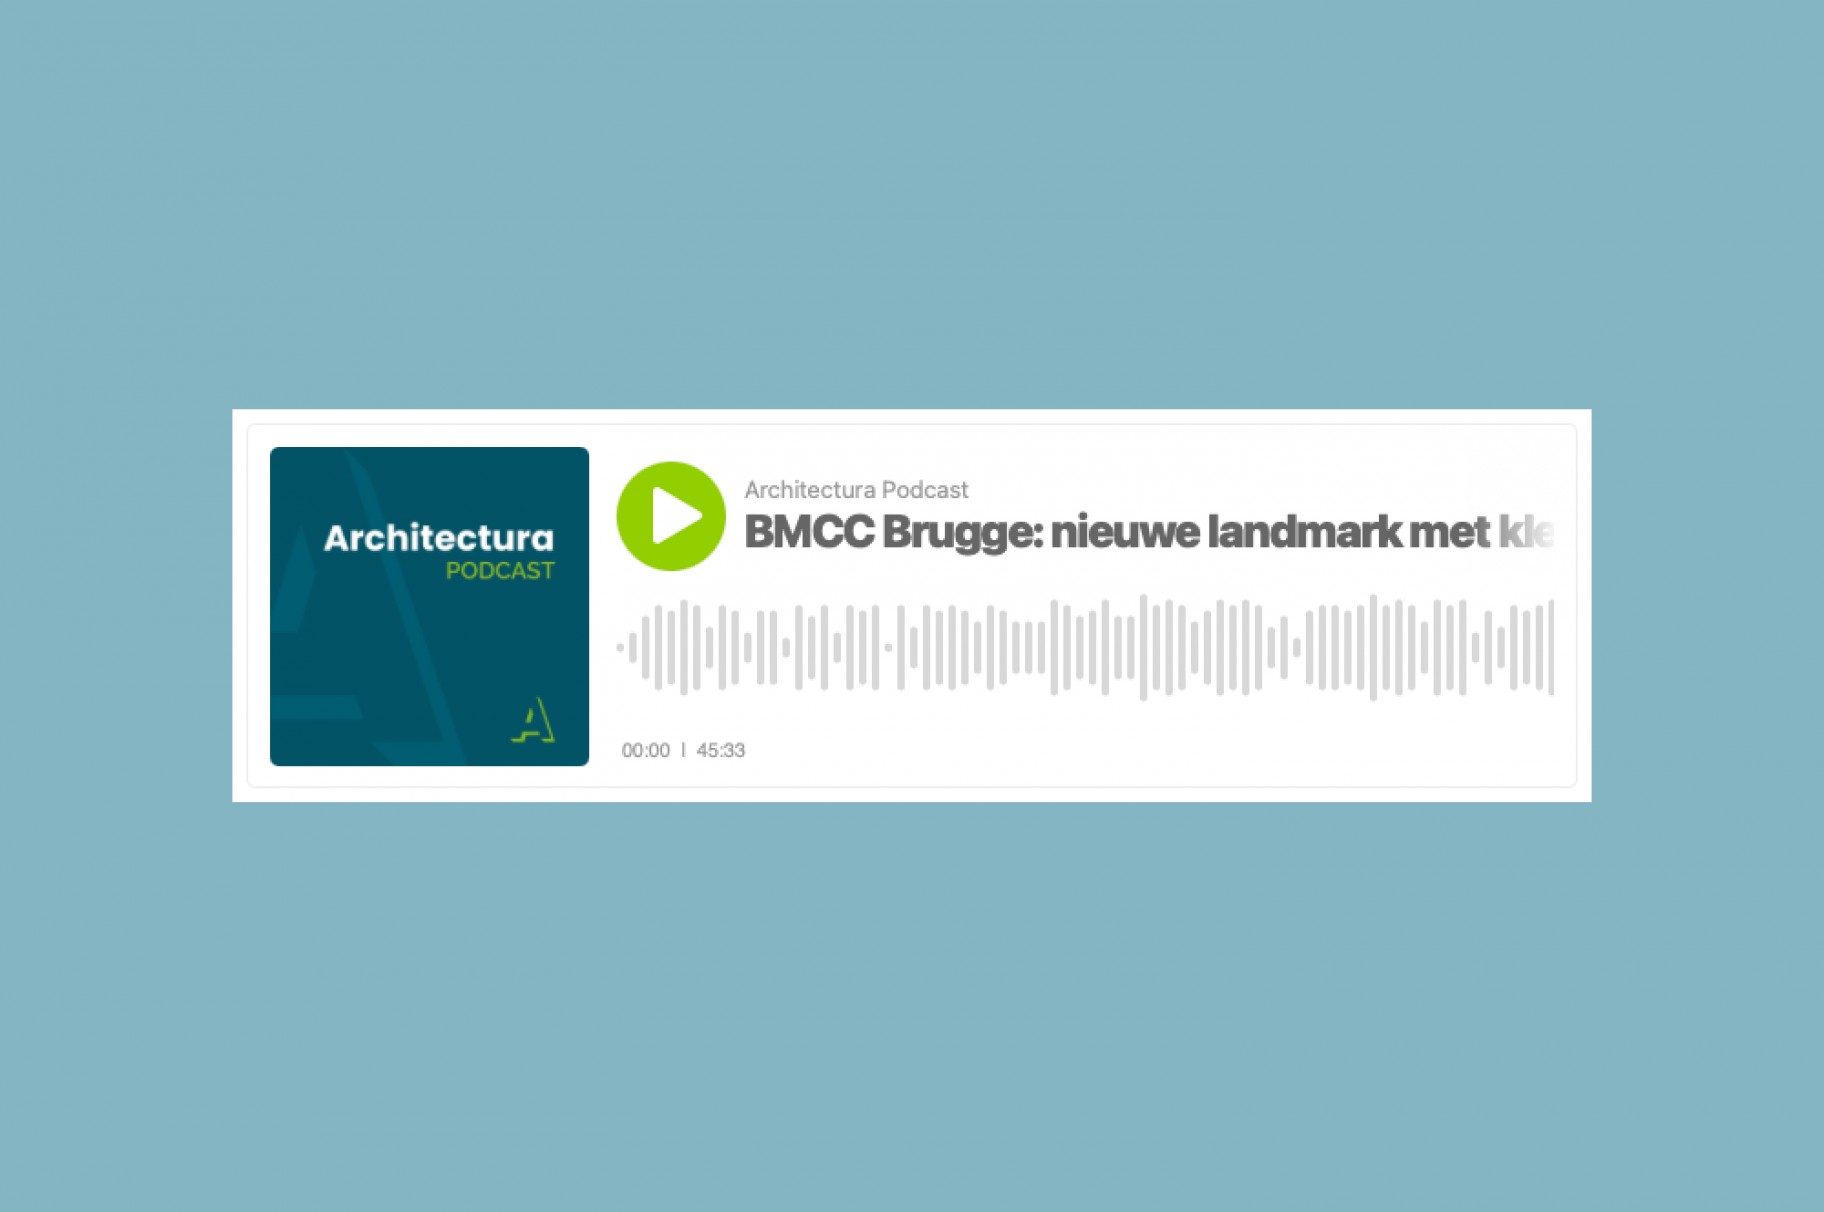 Podcast Architectura about Bruges Meeting & Convention Centre